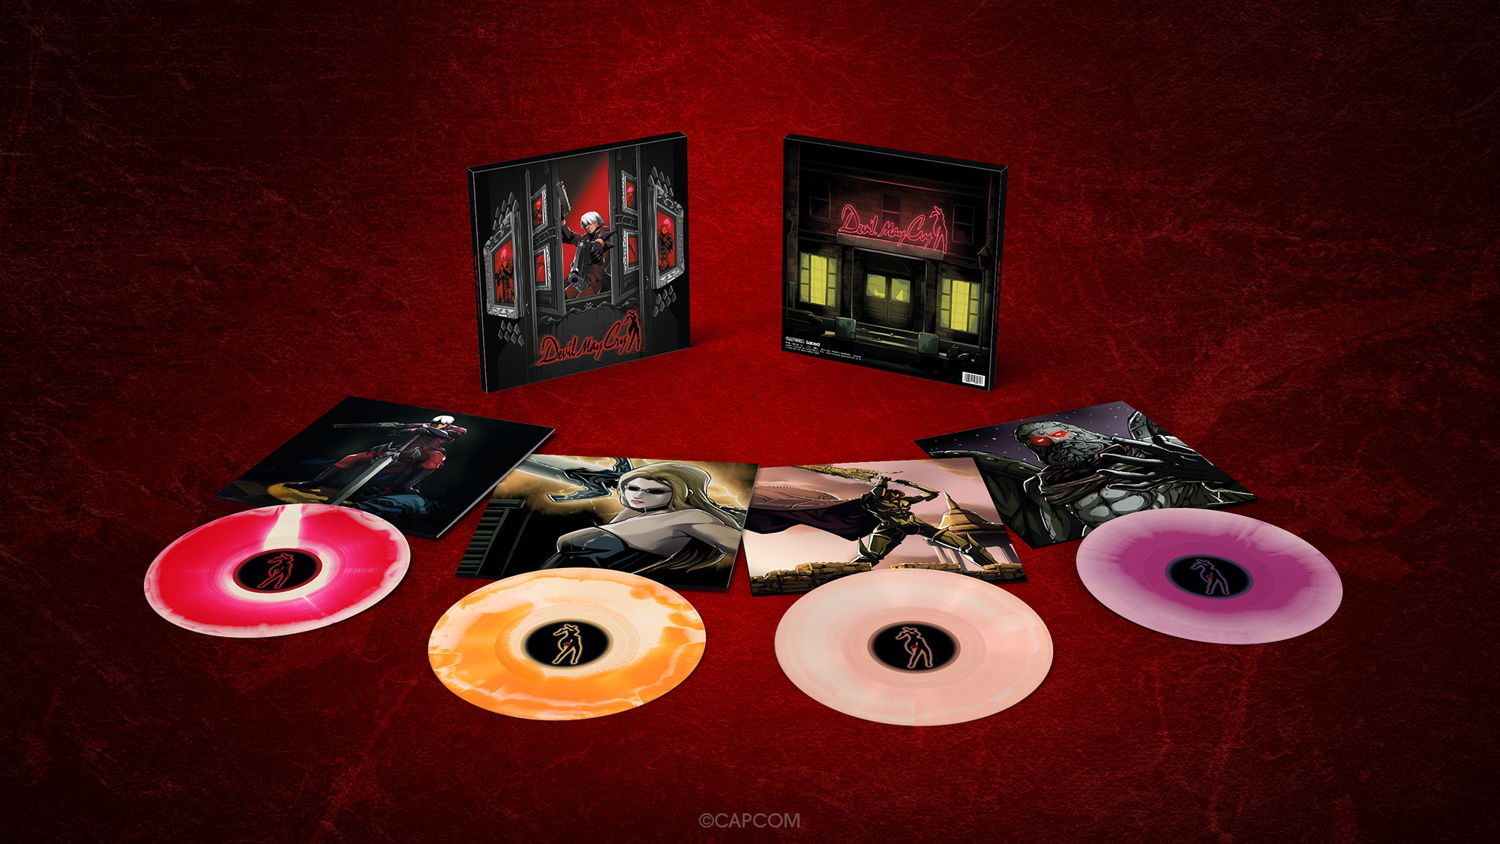 Devil May Cry gets the vinyl treatment